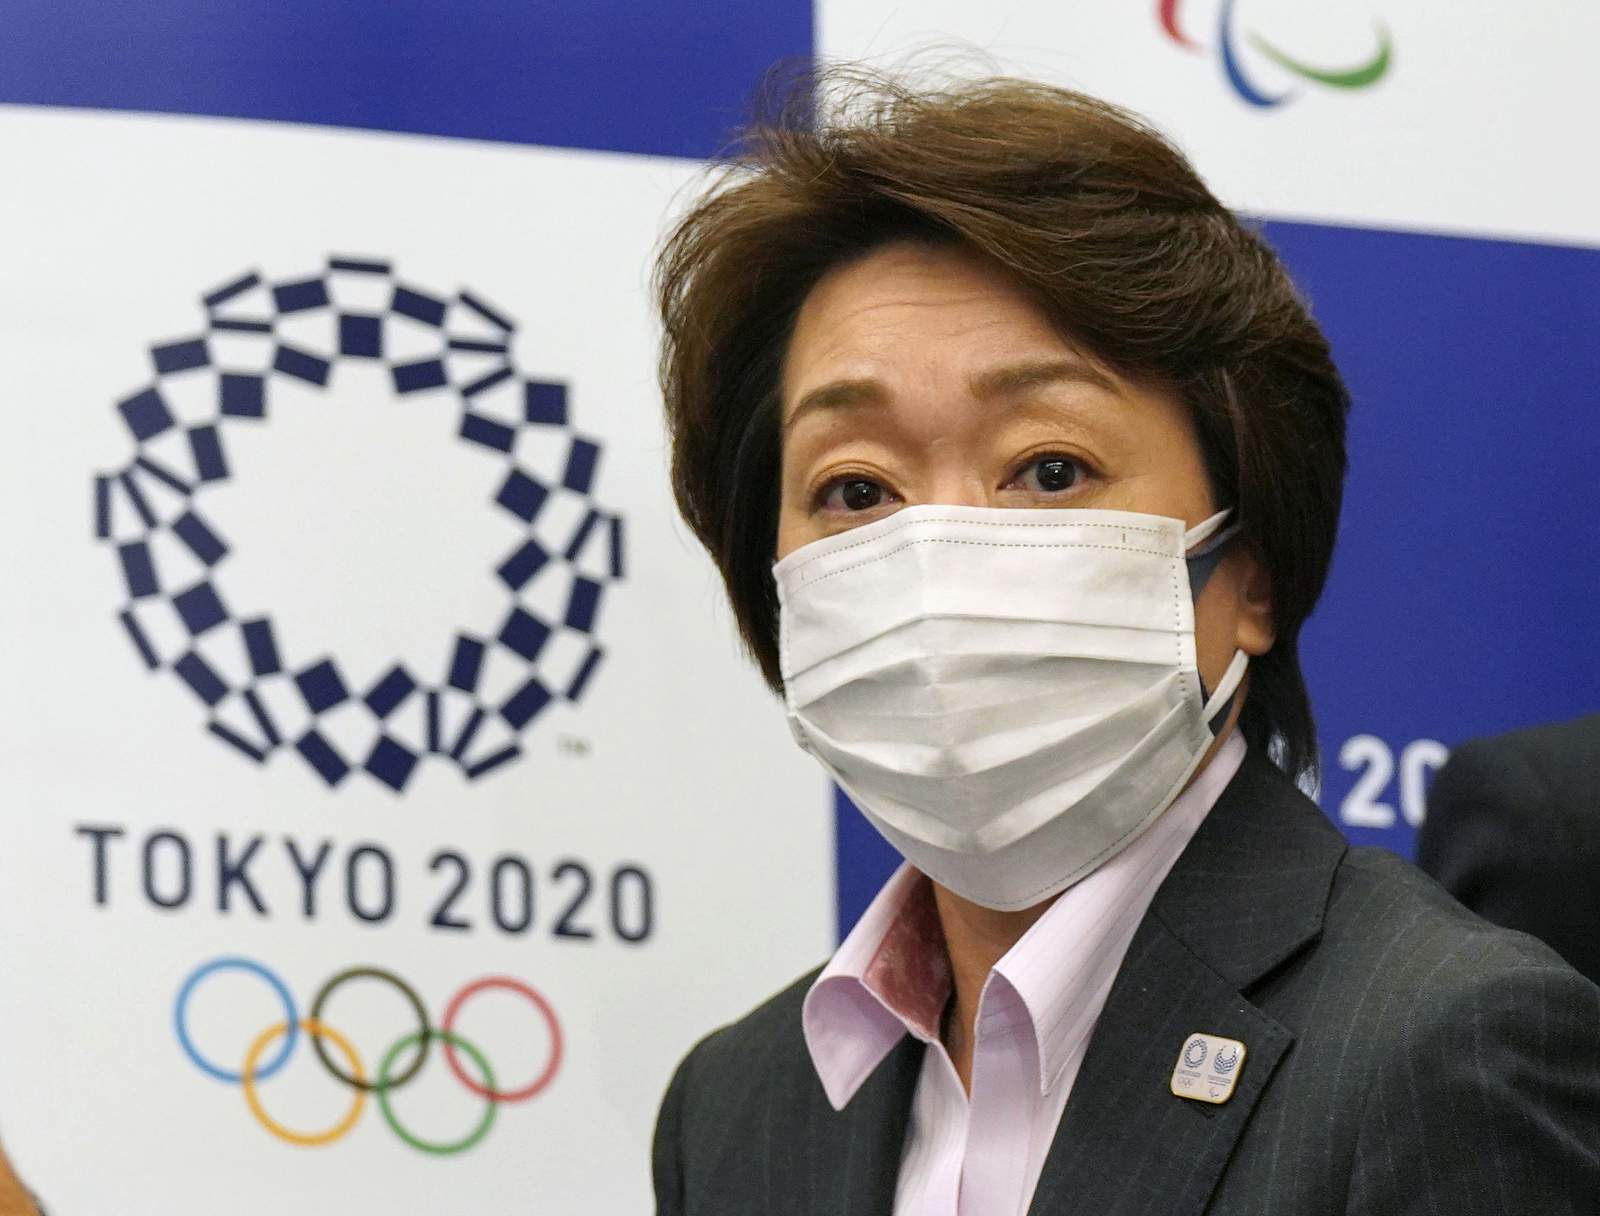 Report: No fans from abroad for postponed Tokyo Olympics